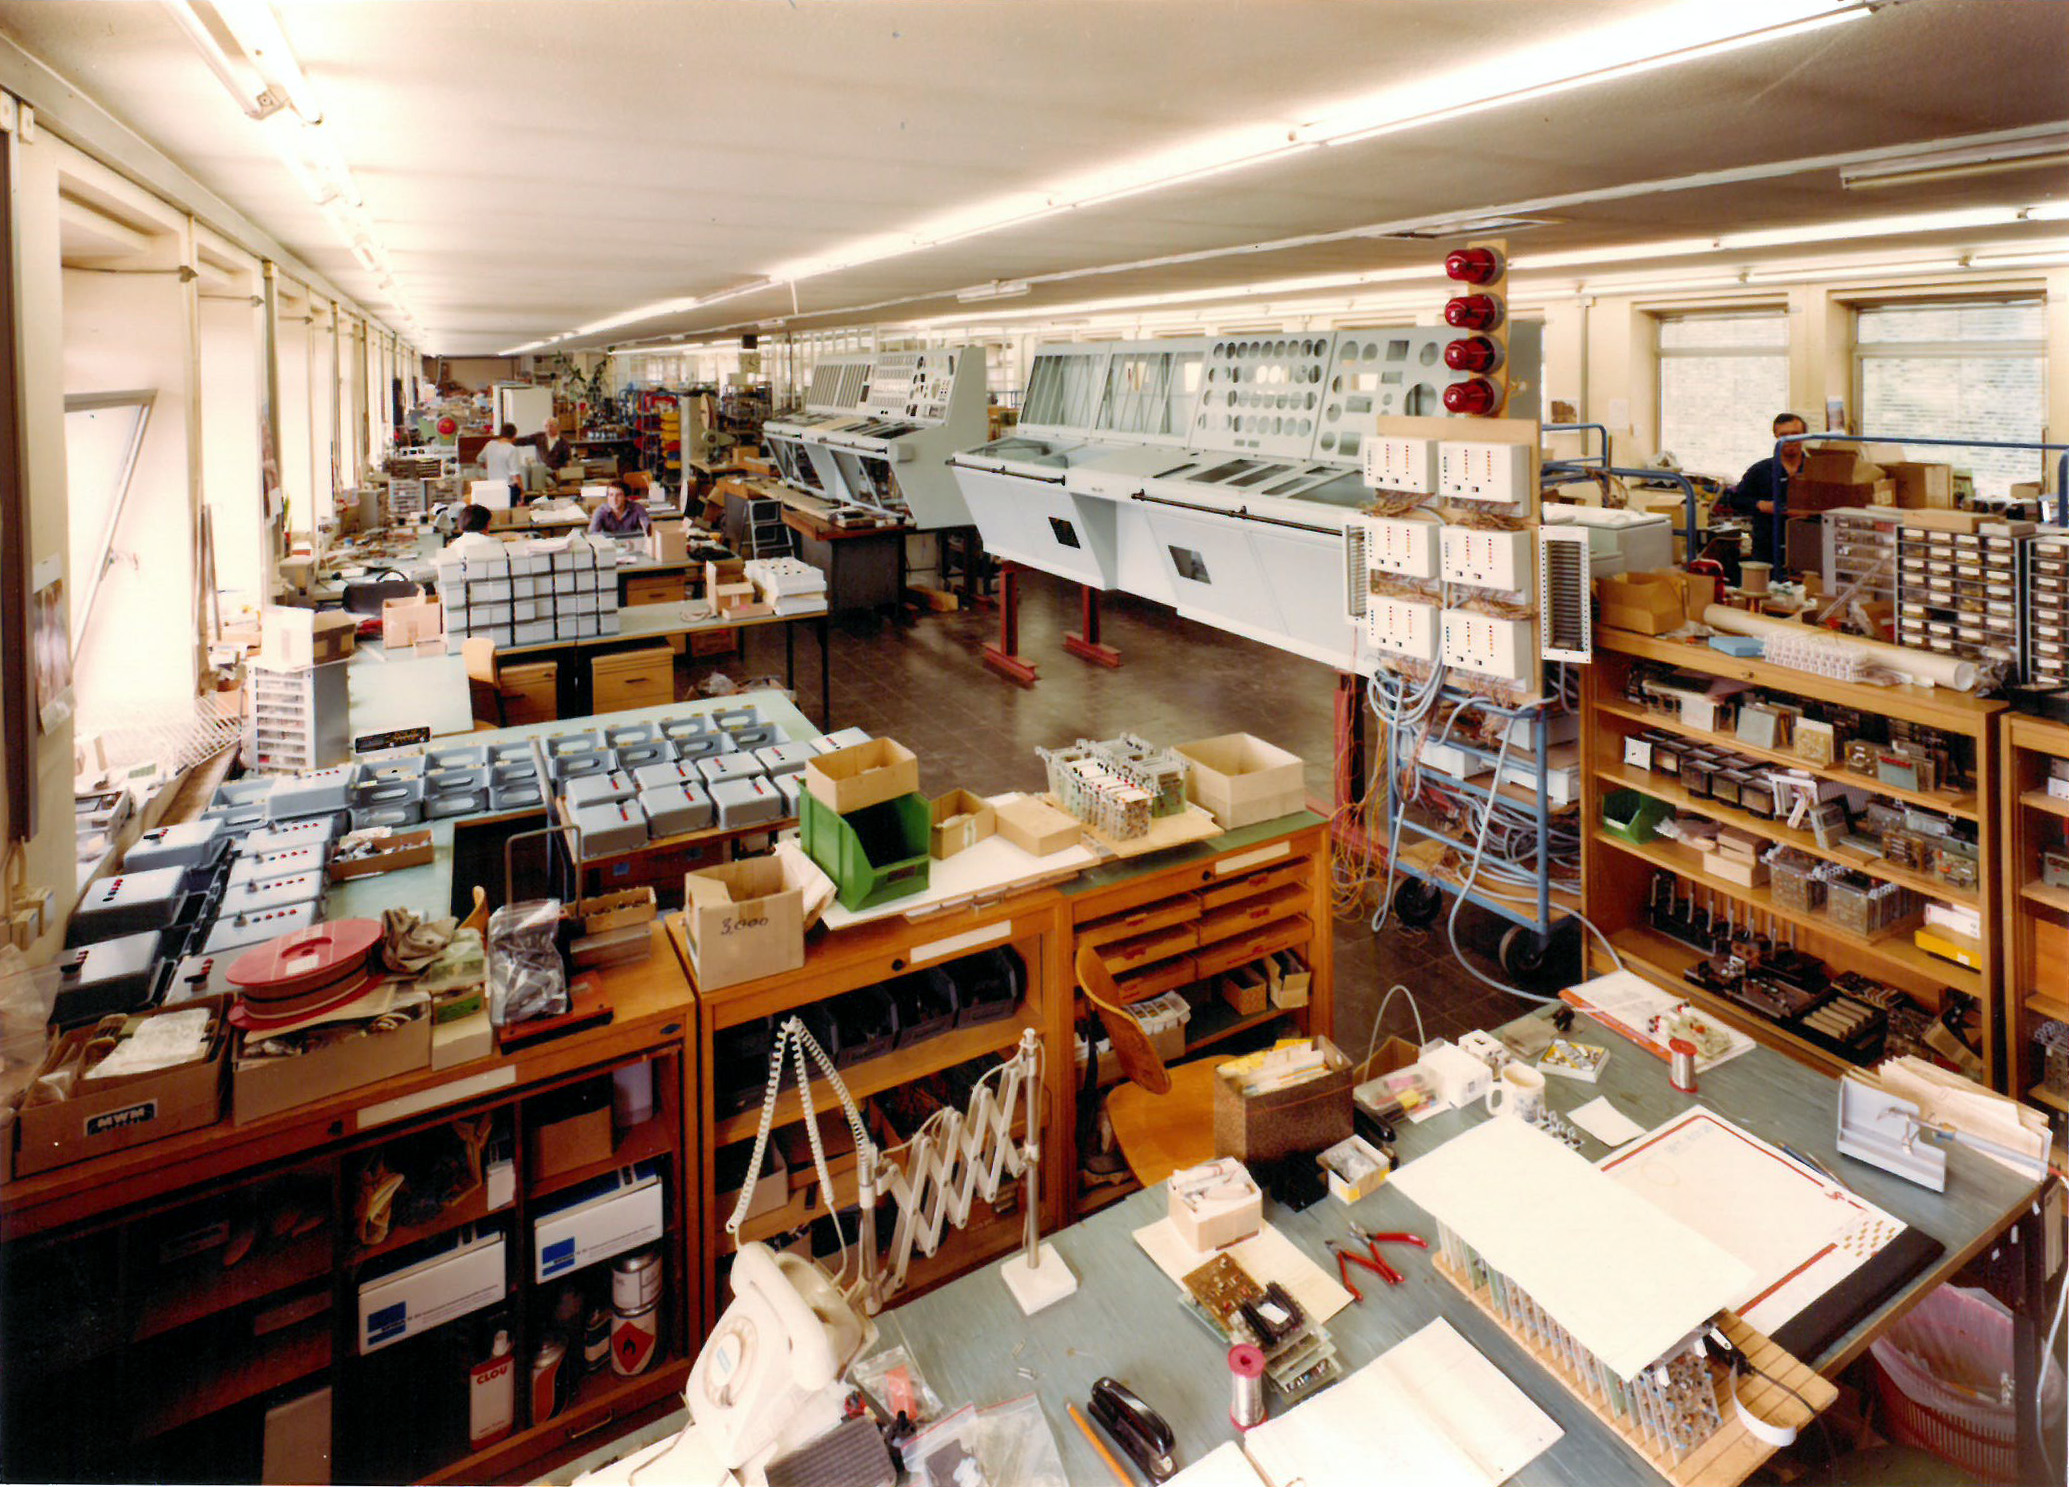 The image shows a historical photo of the centre building - project department